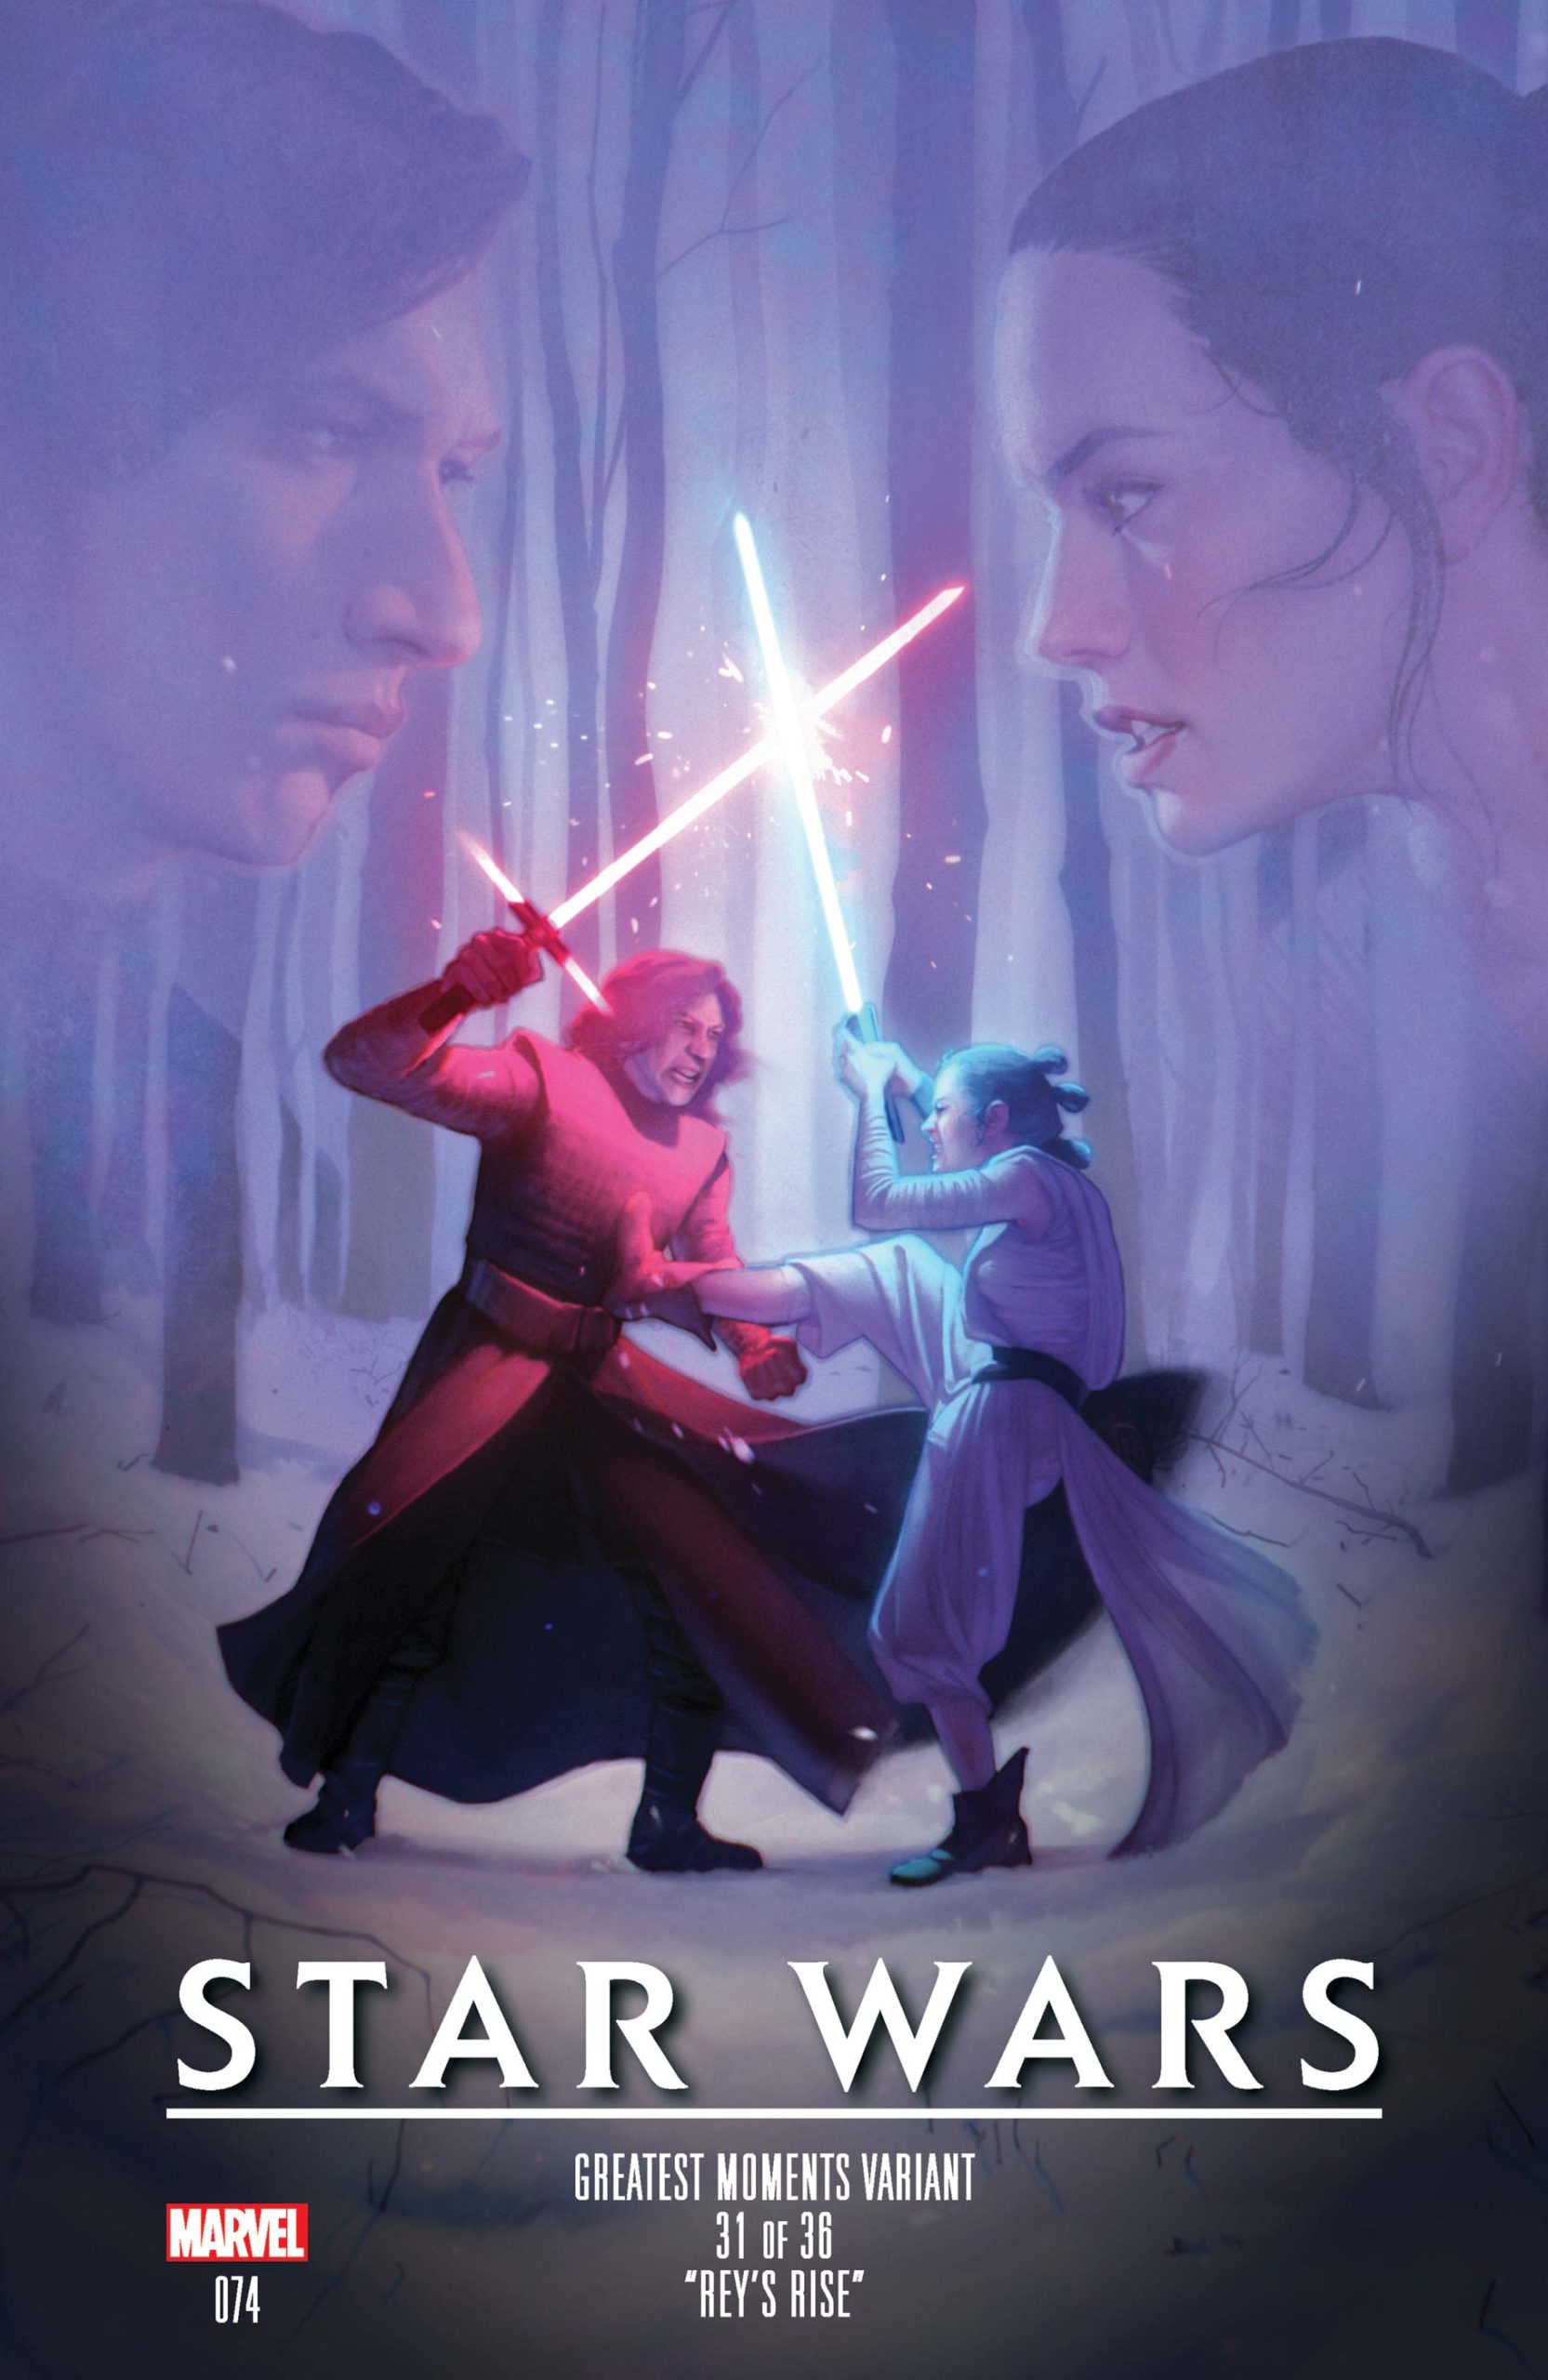 Star Wars #74 (Pauline Voß Greatest Moments Variant Cover) (06.11.2019)